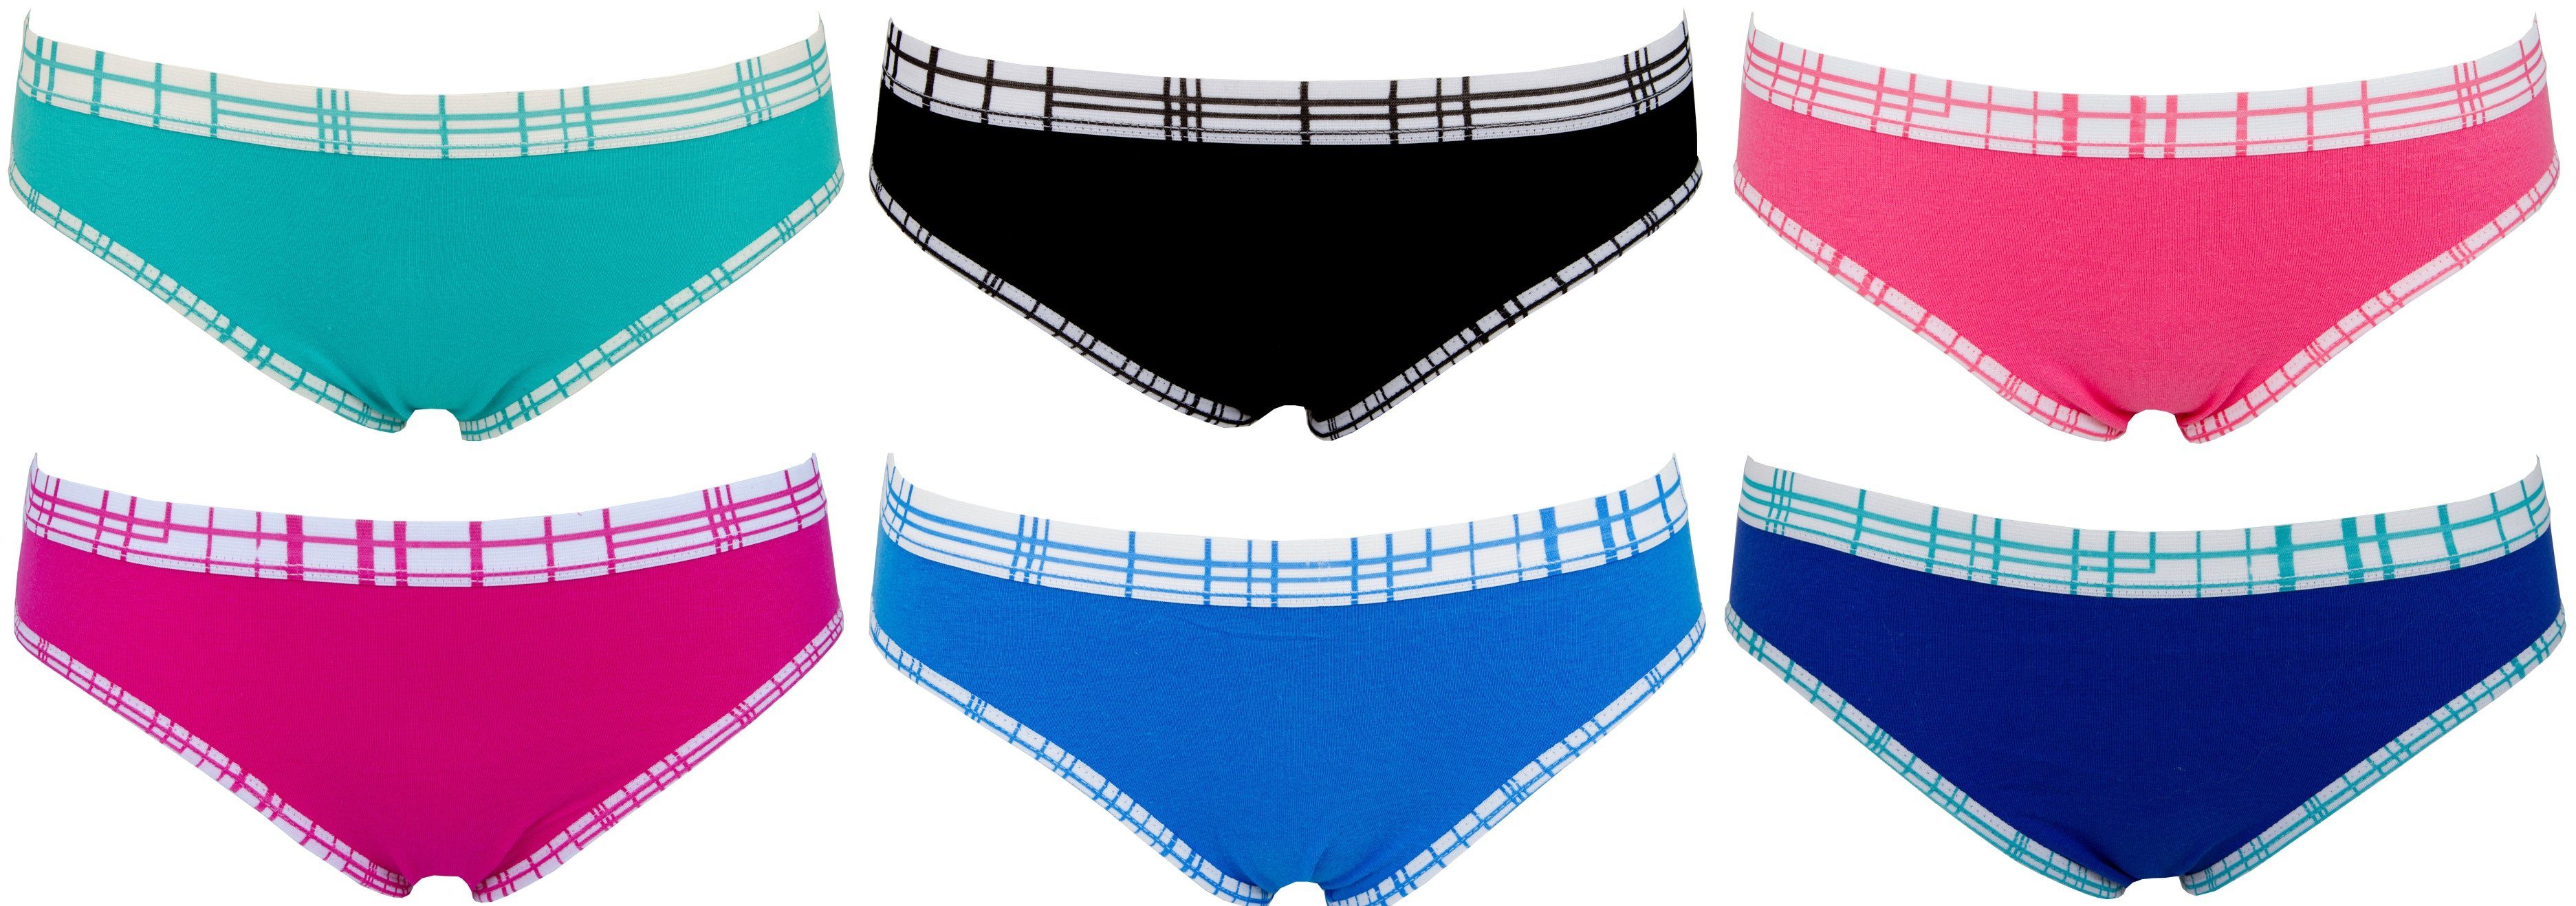 Pantys Knickers Damen Teen 86927 Uni mit Hipster Hotpants Spitze mit 86927 Hotpants Pack Pantys French AvaMia Uni French Knickers 6er-Pack) 6er (Spar-Set, Teen 6er Pack Panty Hipster Damen Spitze